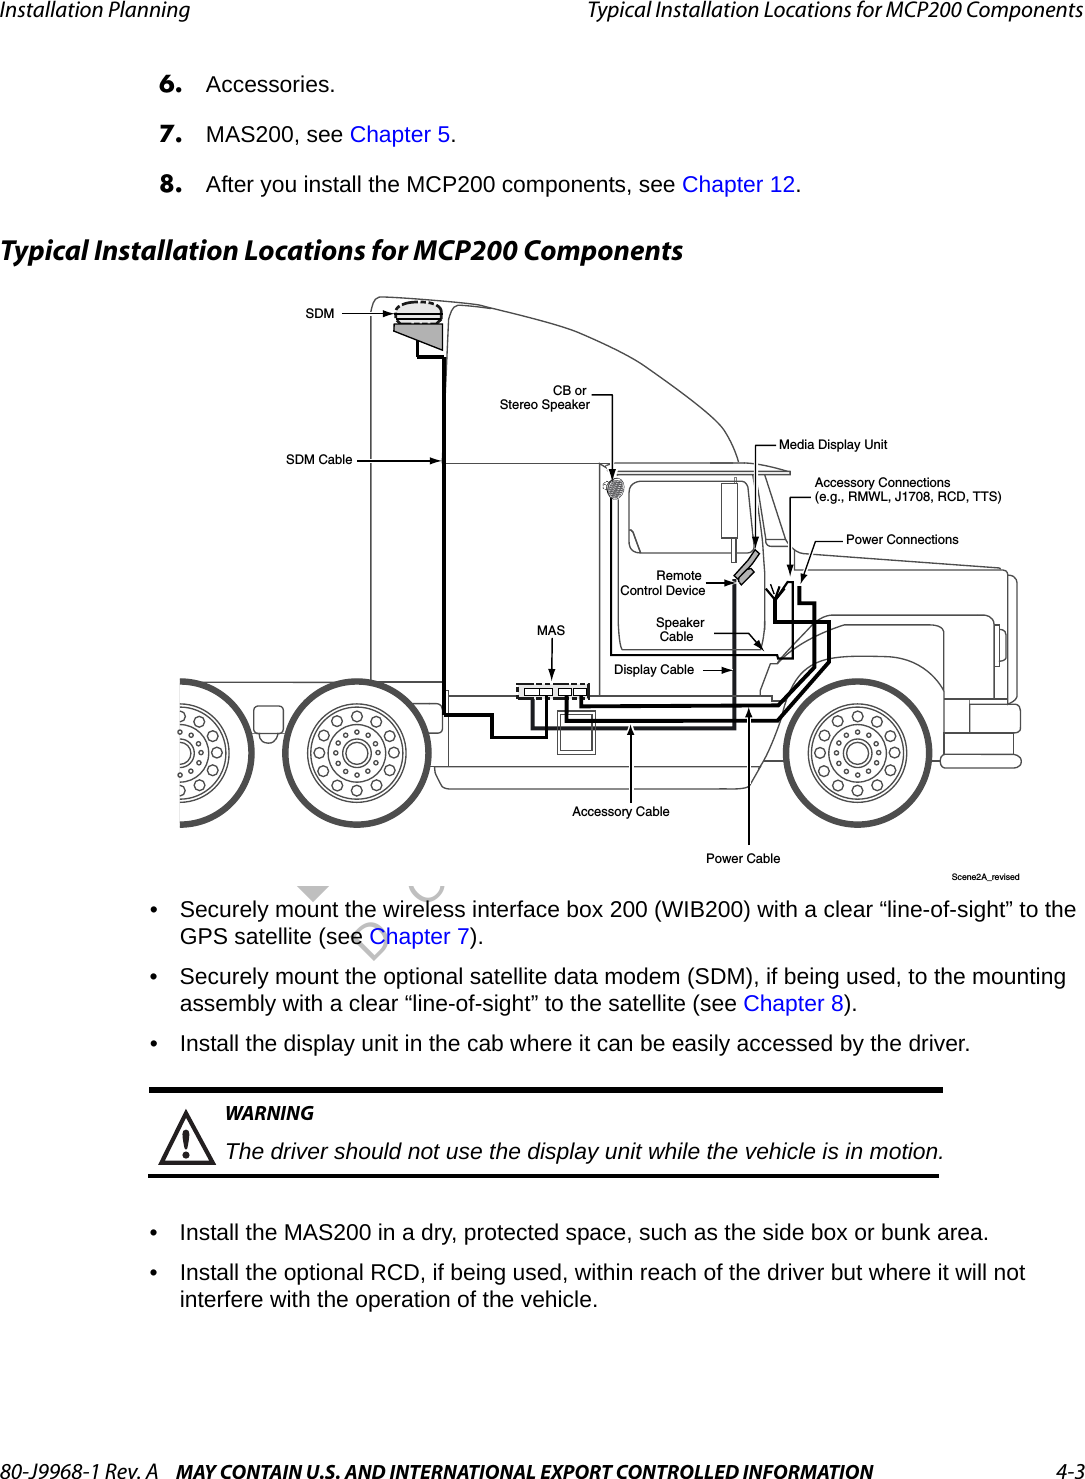 80-J9968-1 Rev. A MAY CONTAIN U.S. AND INTERNATIONAL EXPORT CONTROLLED INFORMATION 4-3Installation Planning Typical Installation Locations for MCP200 ComponentsDO N OT COPY6. Accessories.7. MAS200, see Chapter 5.8. After you install the MCP200 components, see Chapter 12.Typical Installation Locations for MCP200 Components• Securely mount the wireless interface box 200 (WIB200) with a clear “line-of-sight” to the GPS satellite (see Chapter 7).• Securely mount the optional satellite data modem (SDM), if being used, to the mounting assembly with a clear “line-of-sight” to the satellite (see Chapter 8).• Install the display unit in the cab where it can be easily accessed by the driver.WARNINGThe driver should not use the display unit while the vehicle is in motion.• Install the MAS200 in a dry, protected space, such as the side box or bunk area.• Install the optional RCD, if being used, within reach of the driver but where it will not interfere with the operation of the vehicle. SDM SDM CableAccessory Connections(e.g., RMWL, J1708, RCD, TTS)Power CableAccessory CablePower ConnectionsMASDisplay CableRemote Control DeviceCB or Stereo SpeakerSpeaker CableMedia Display UnitScene2A_revised